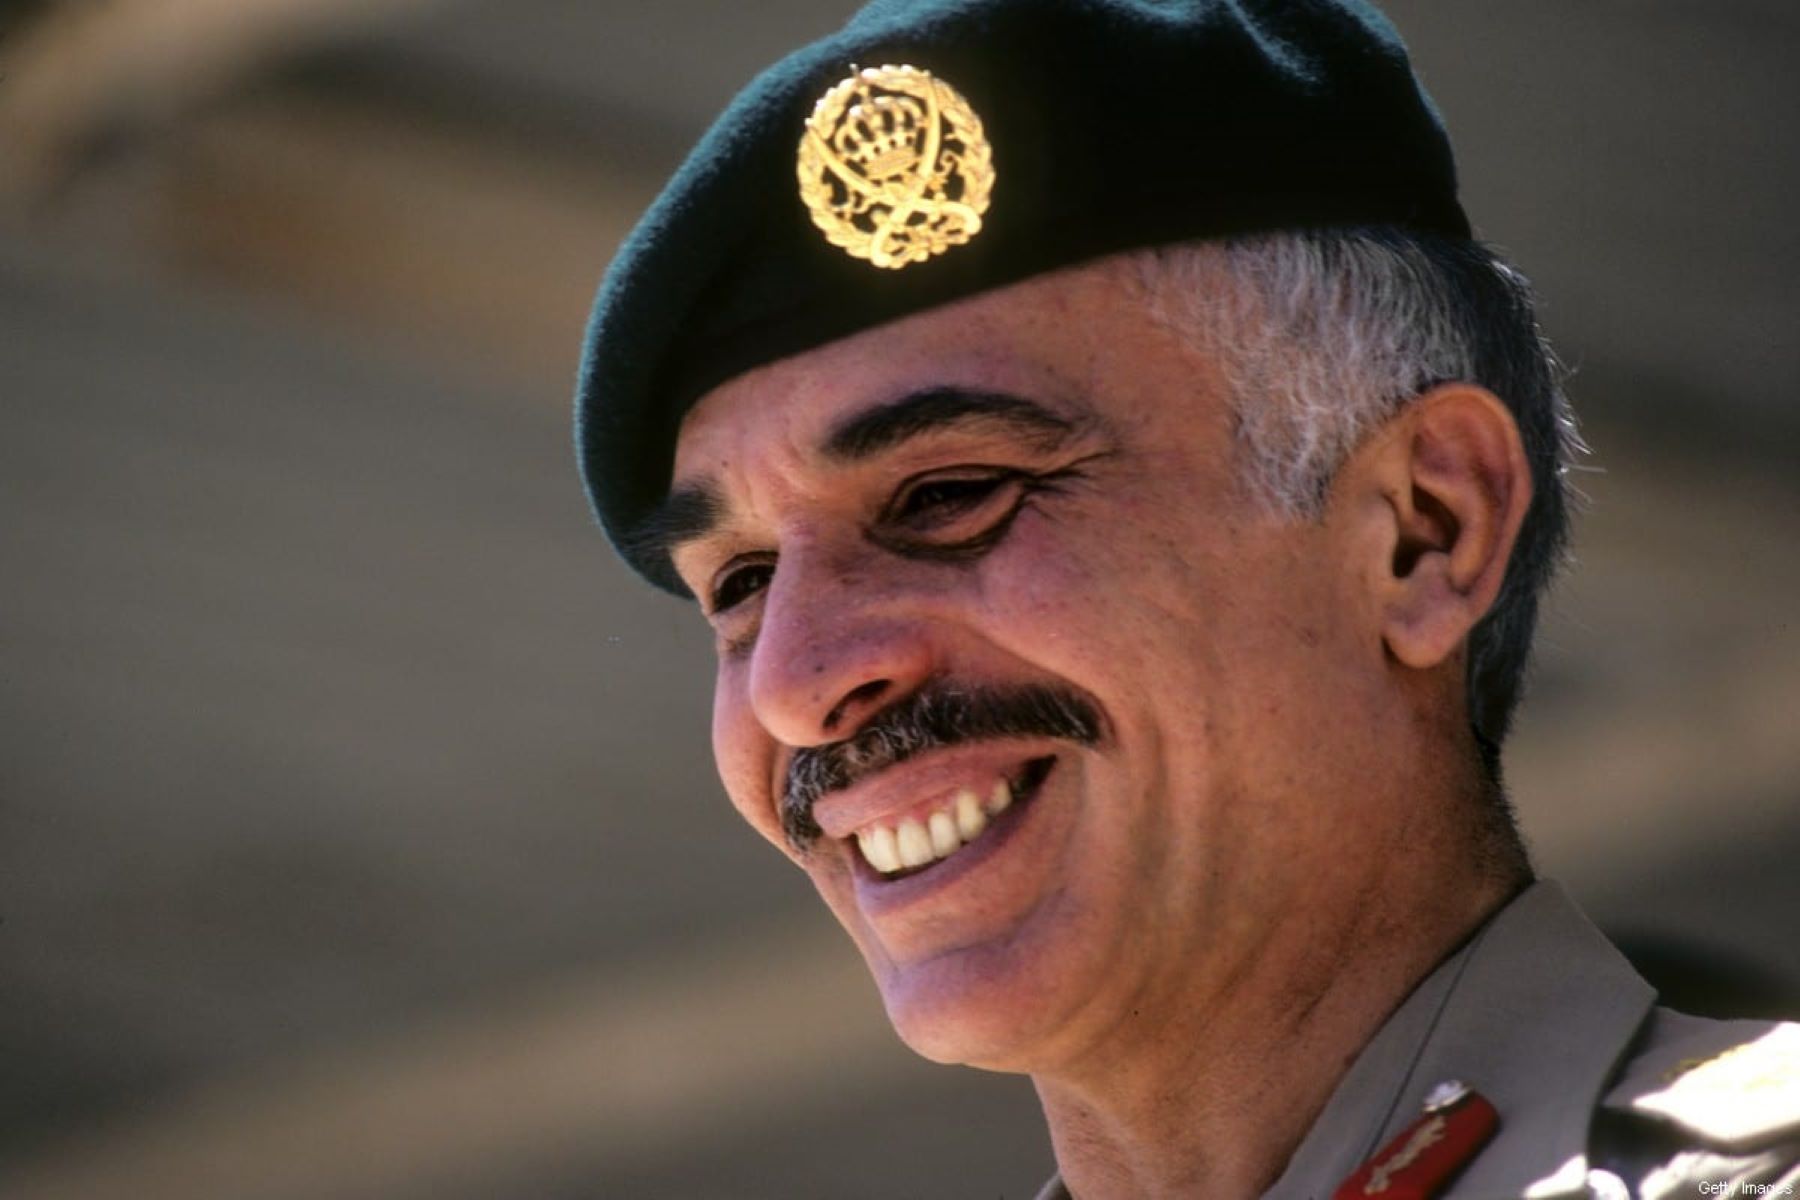 19 Astounding Facts About King Hussein Of Jordan - Facts.net